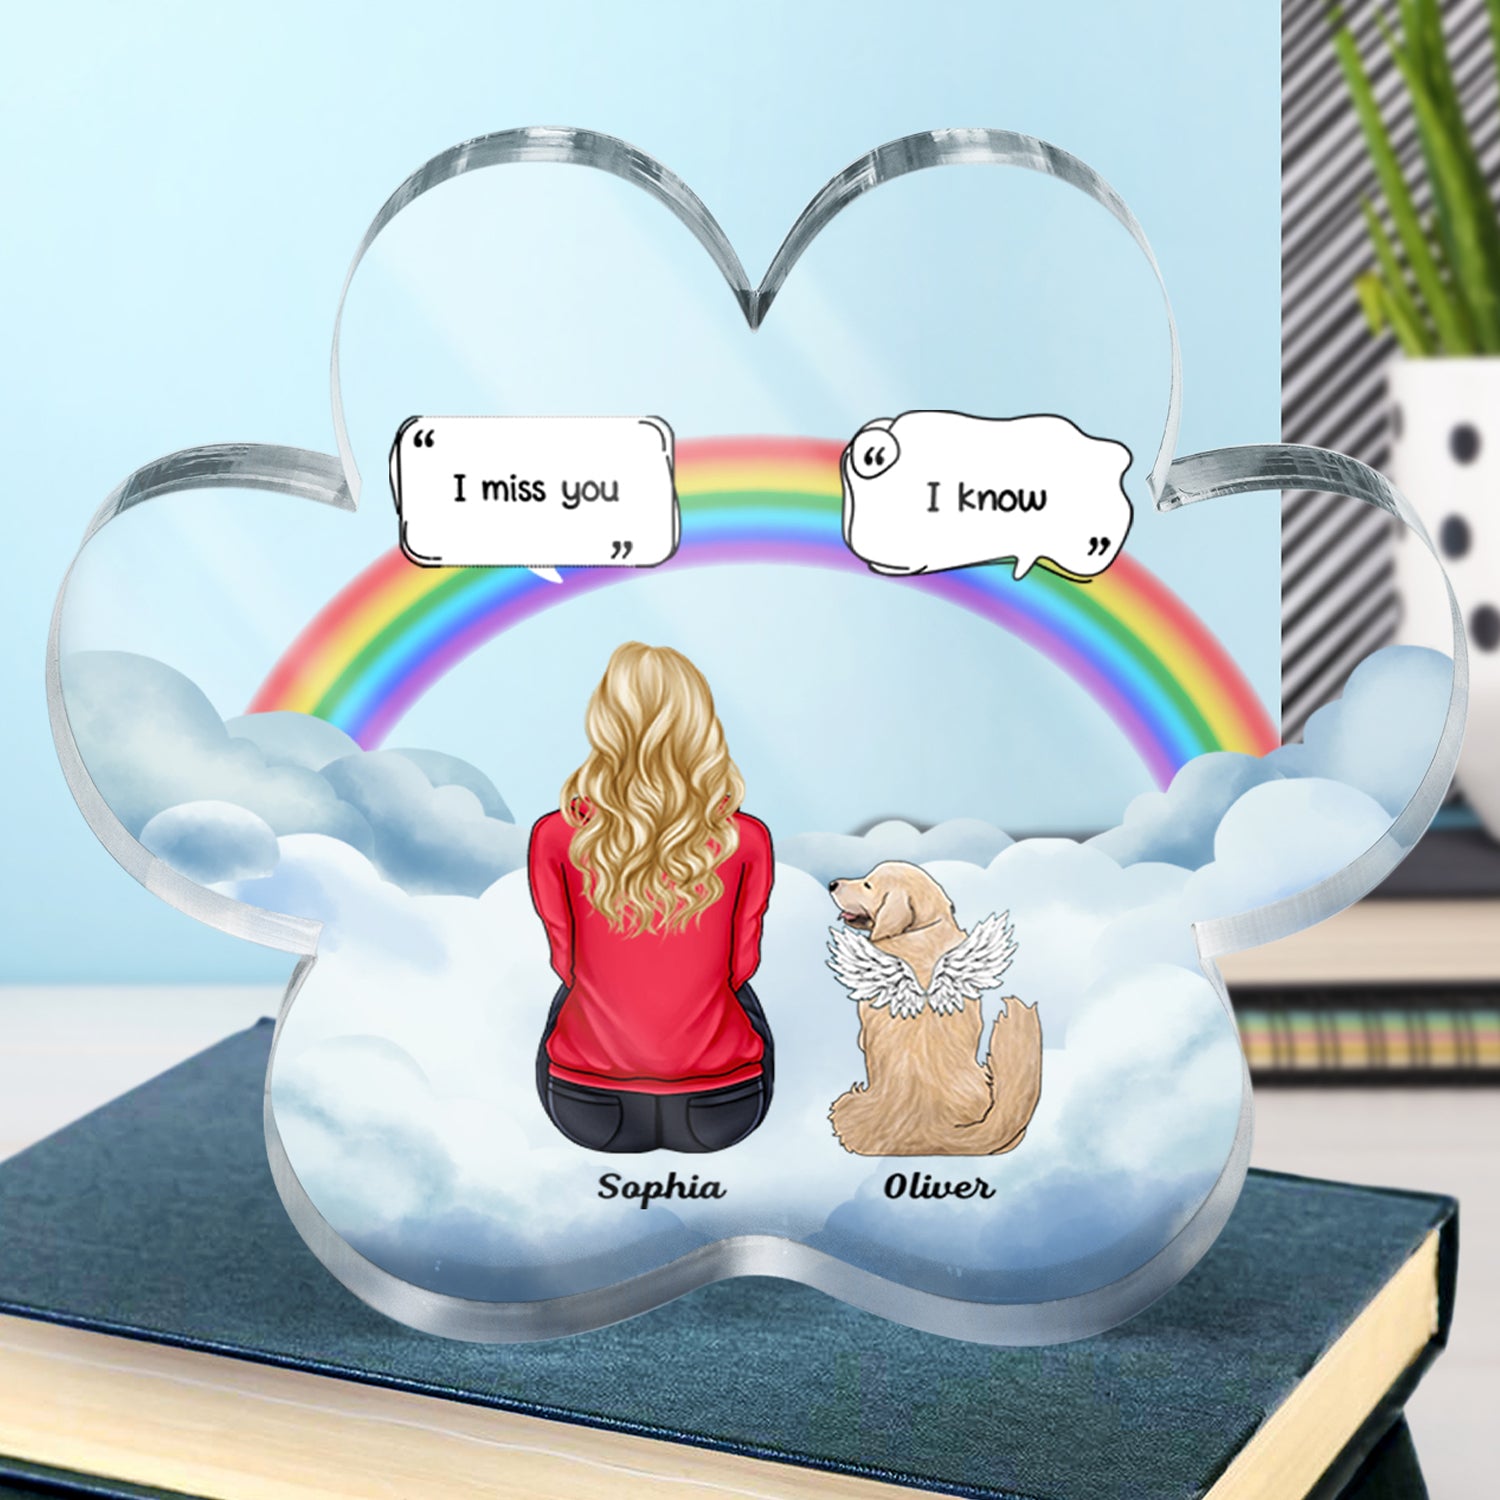 Personalized Desktop - Transparent Plaque - Sisters/ Best Friends Gifts -  Chibi Girls - Always Sisters (Custom Heart-Shaped Acrylic